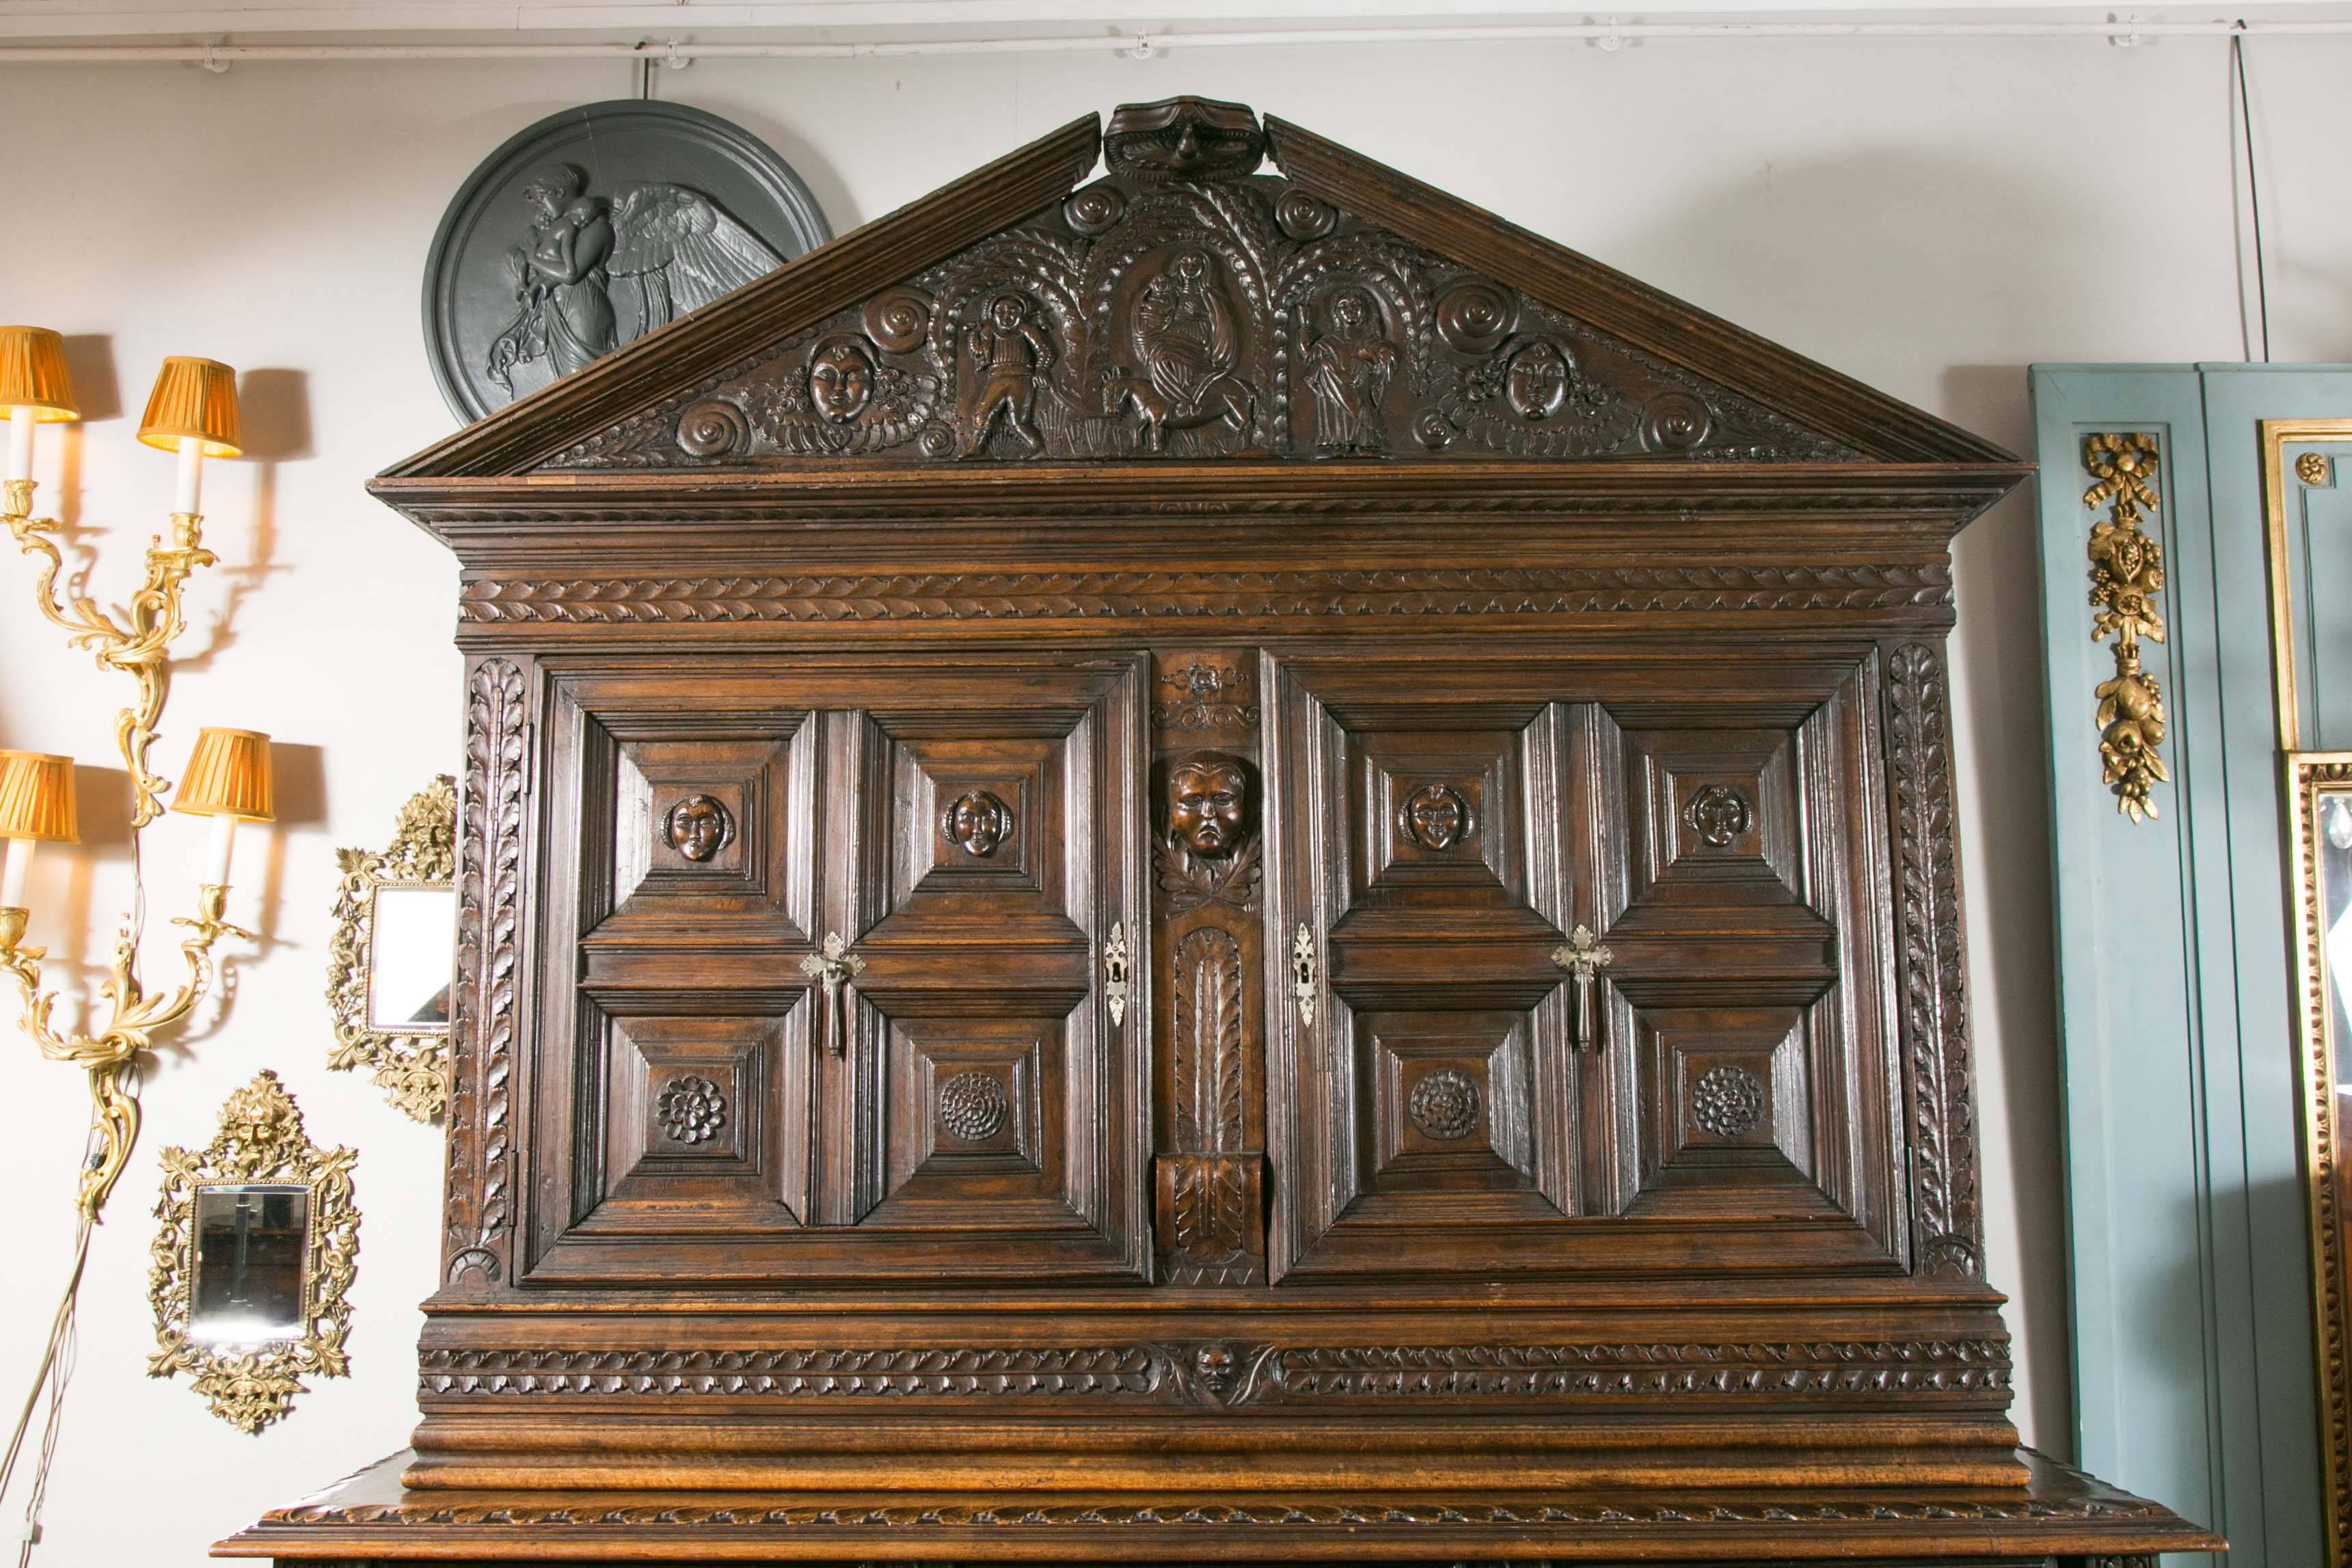 17th century furniture important supposedly from northern Italy, great decoration, carved walnut on all faces. Measures: H 2m53, W 1.76m, W 69cm.